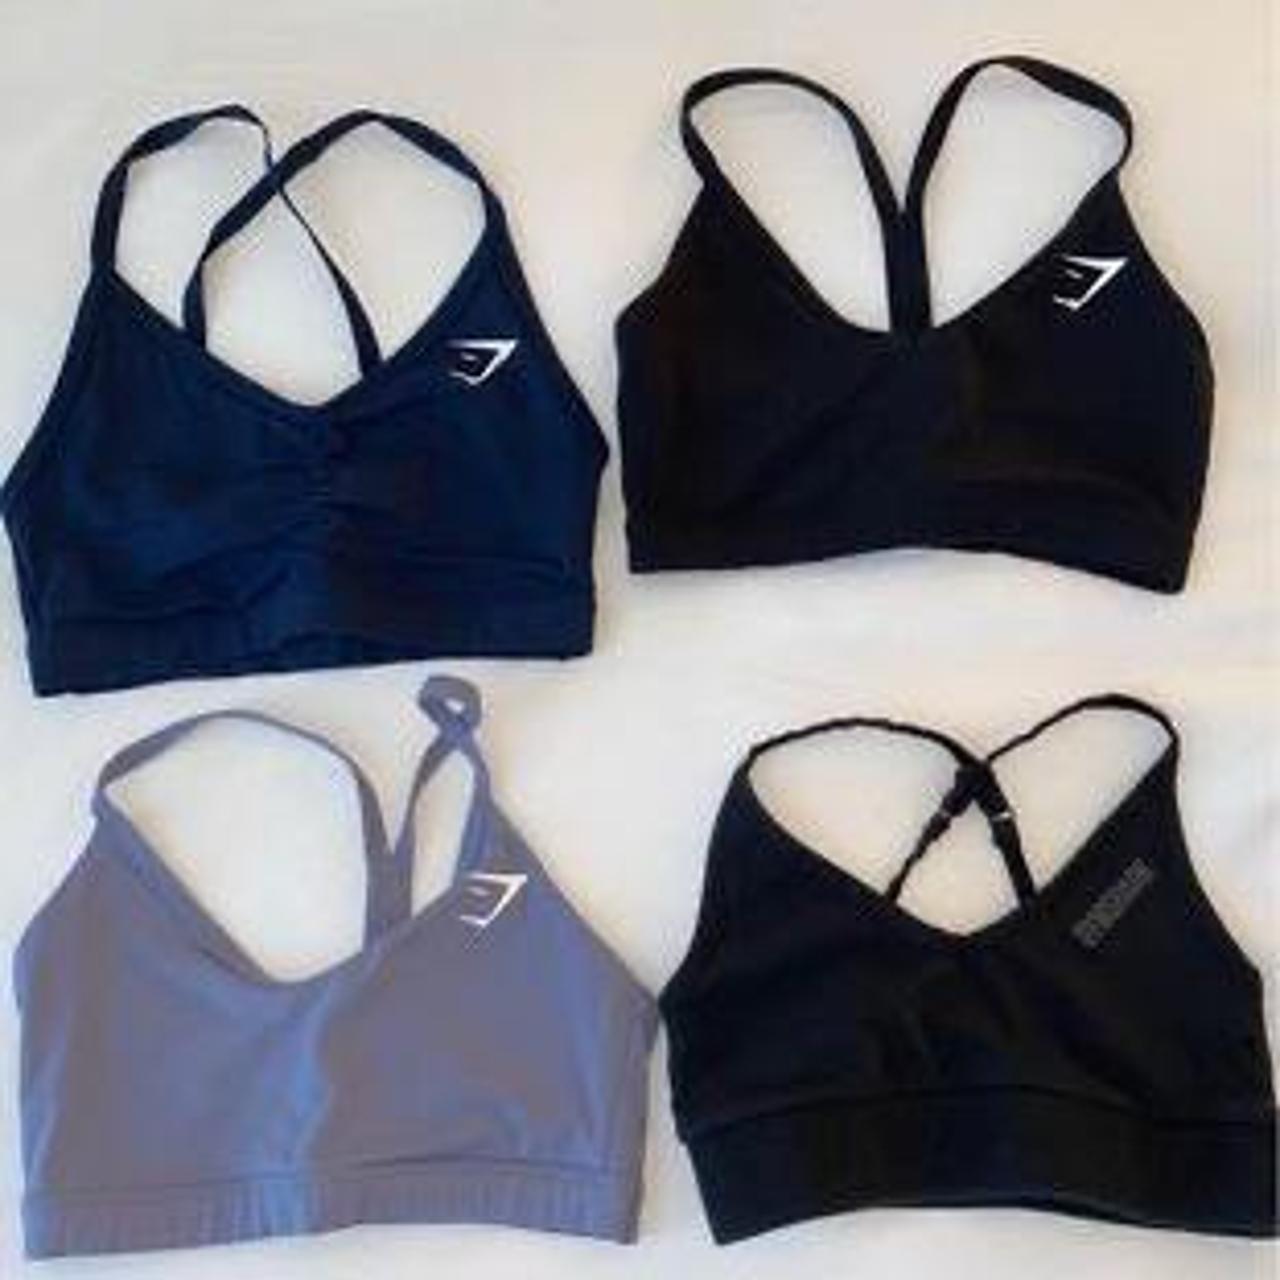 Product Image 1 - cute basic workout bras! excellent